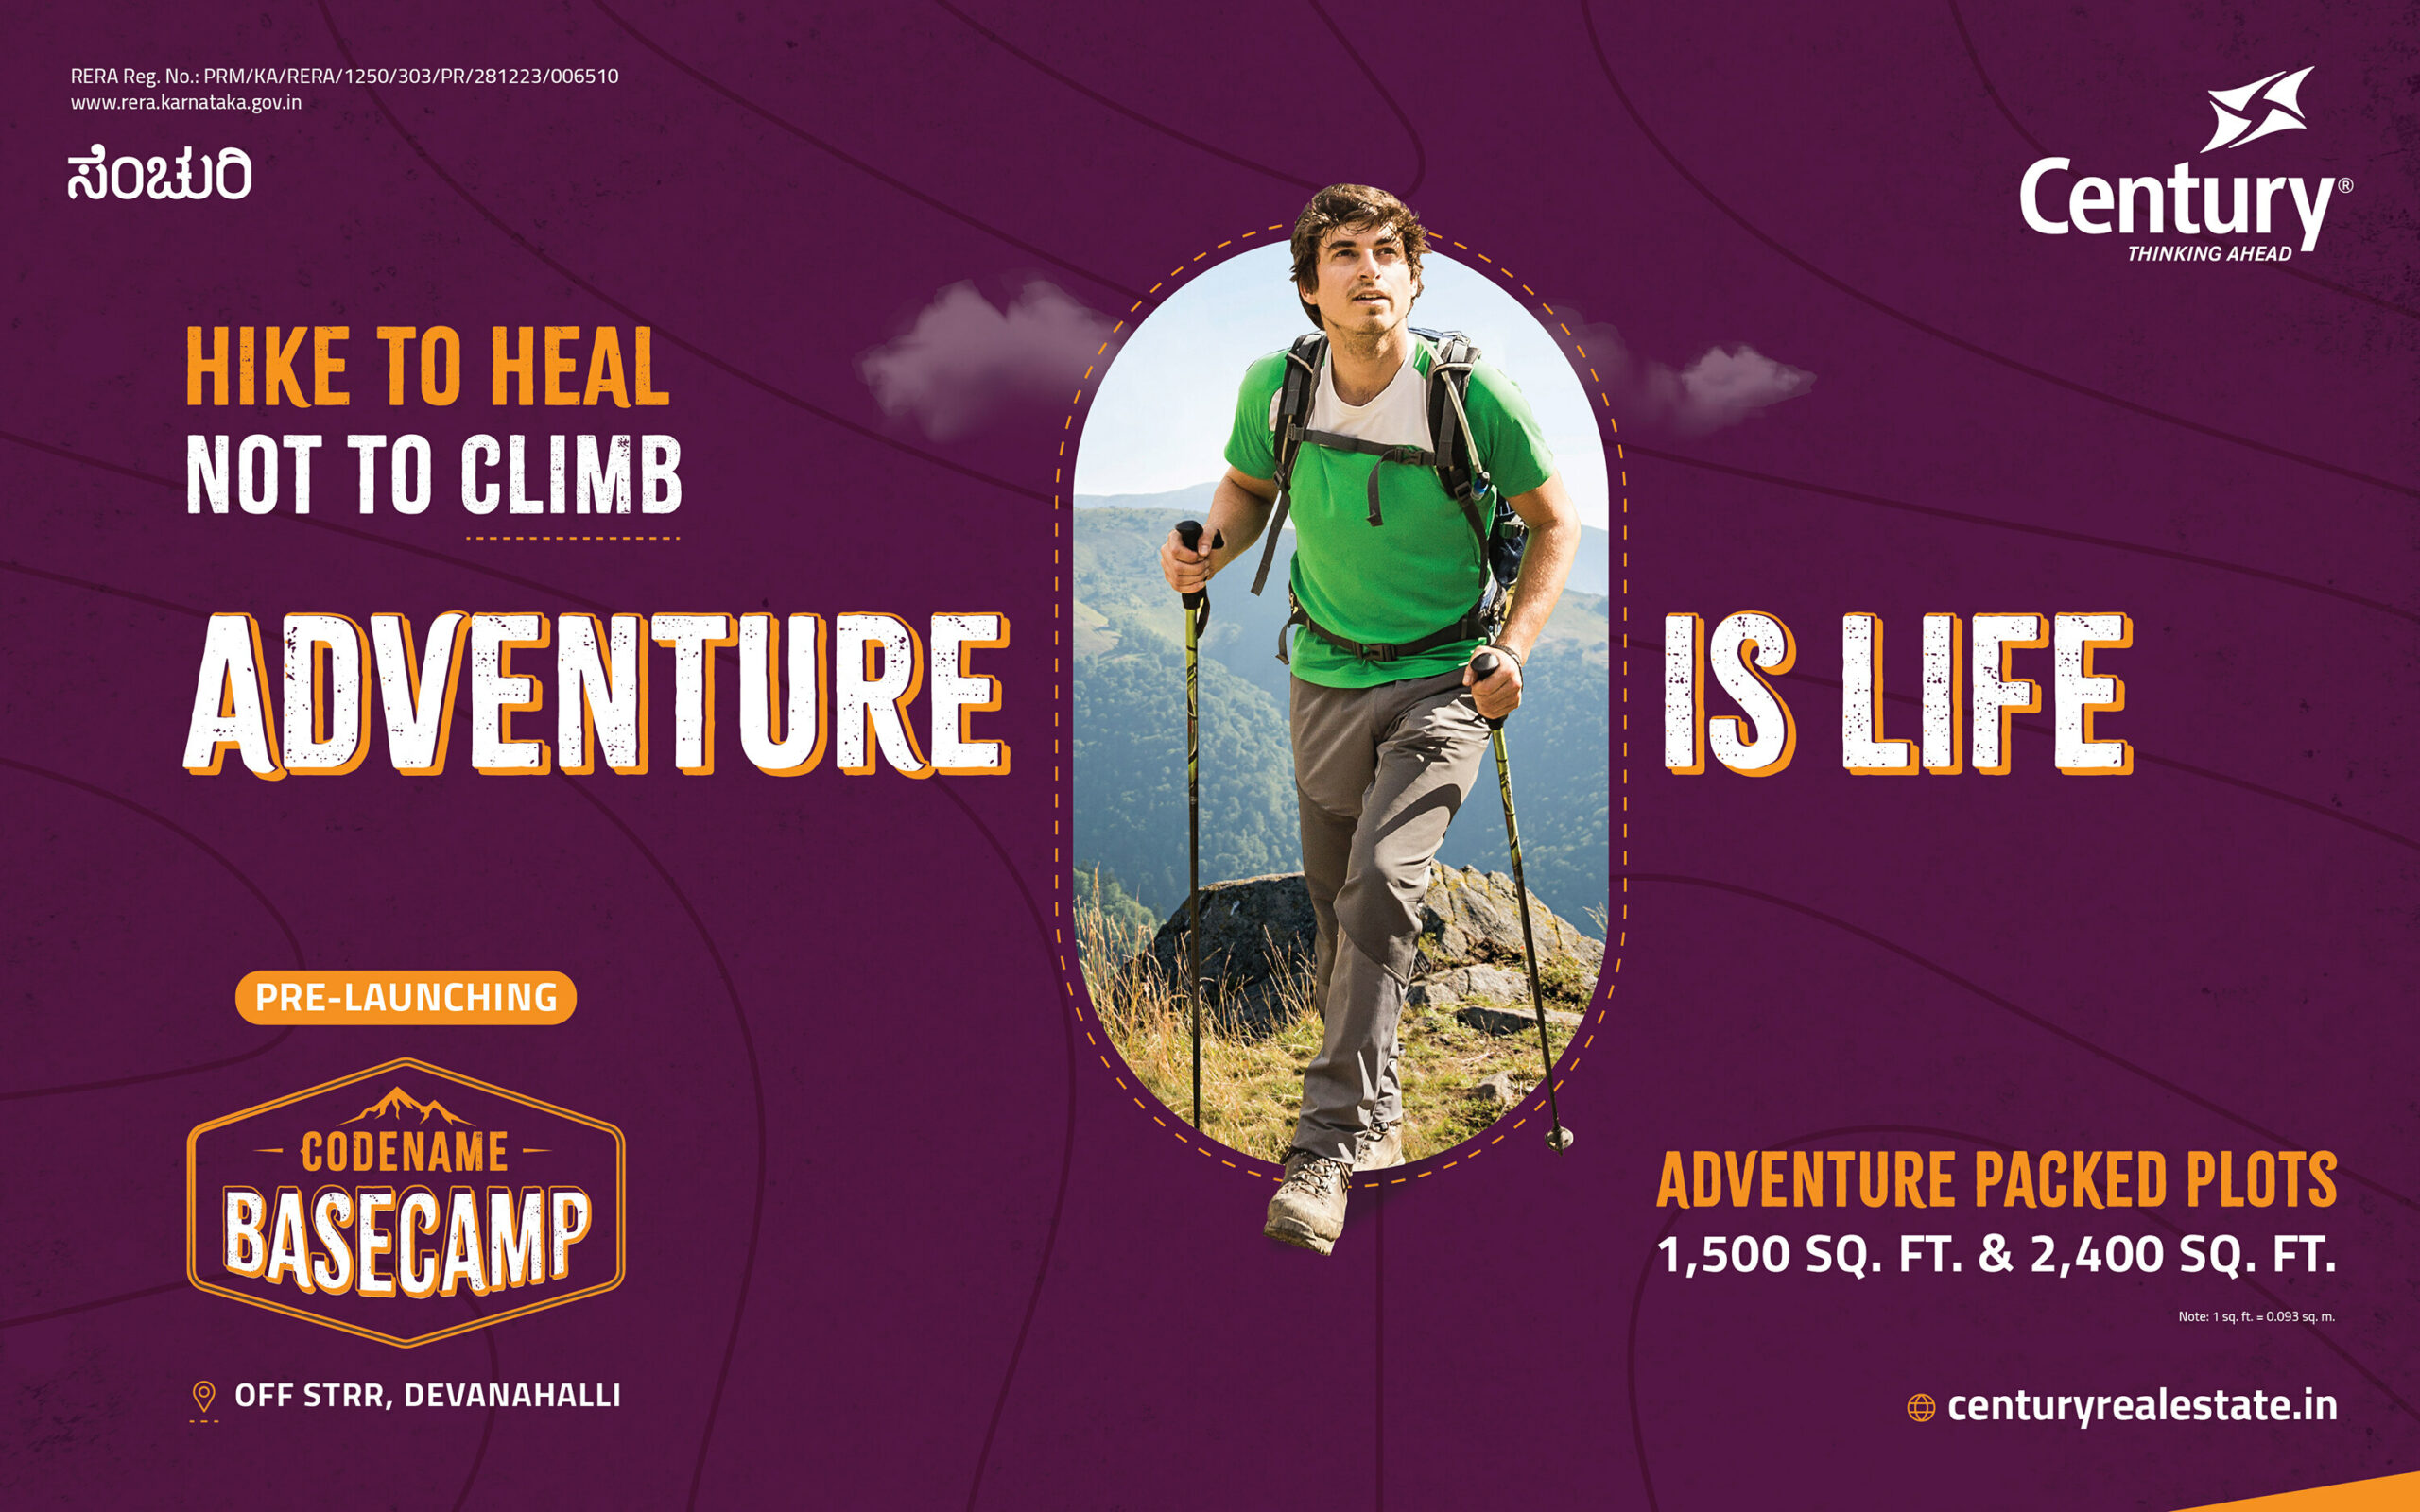 Century Real Estate sells out Phase 1 of adventure-themed plotted development Codename Basecamp within 24 hours of Pre-Launch